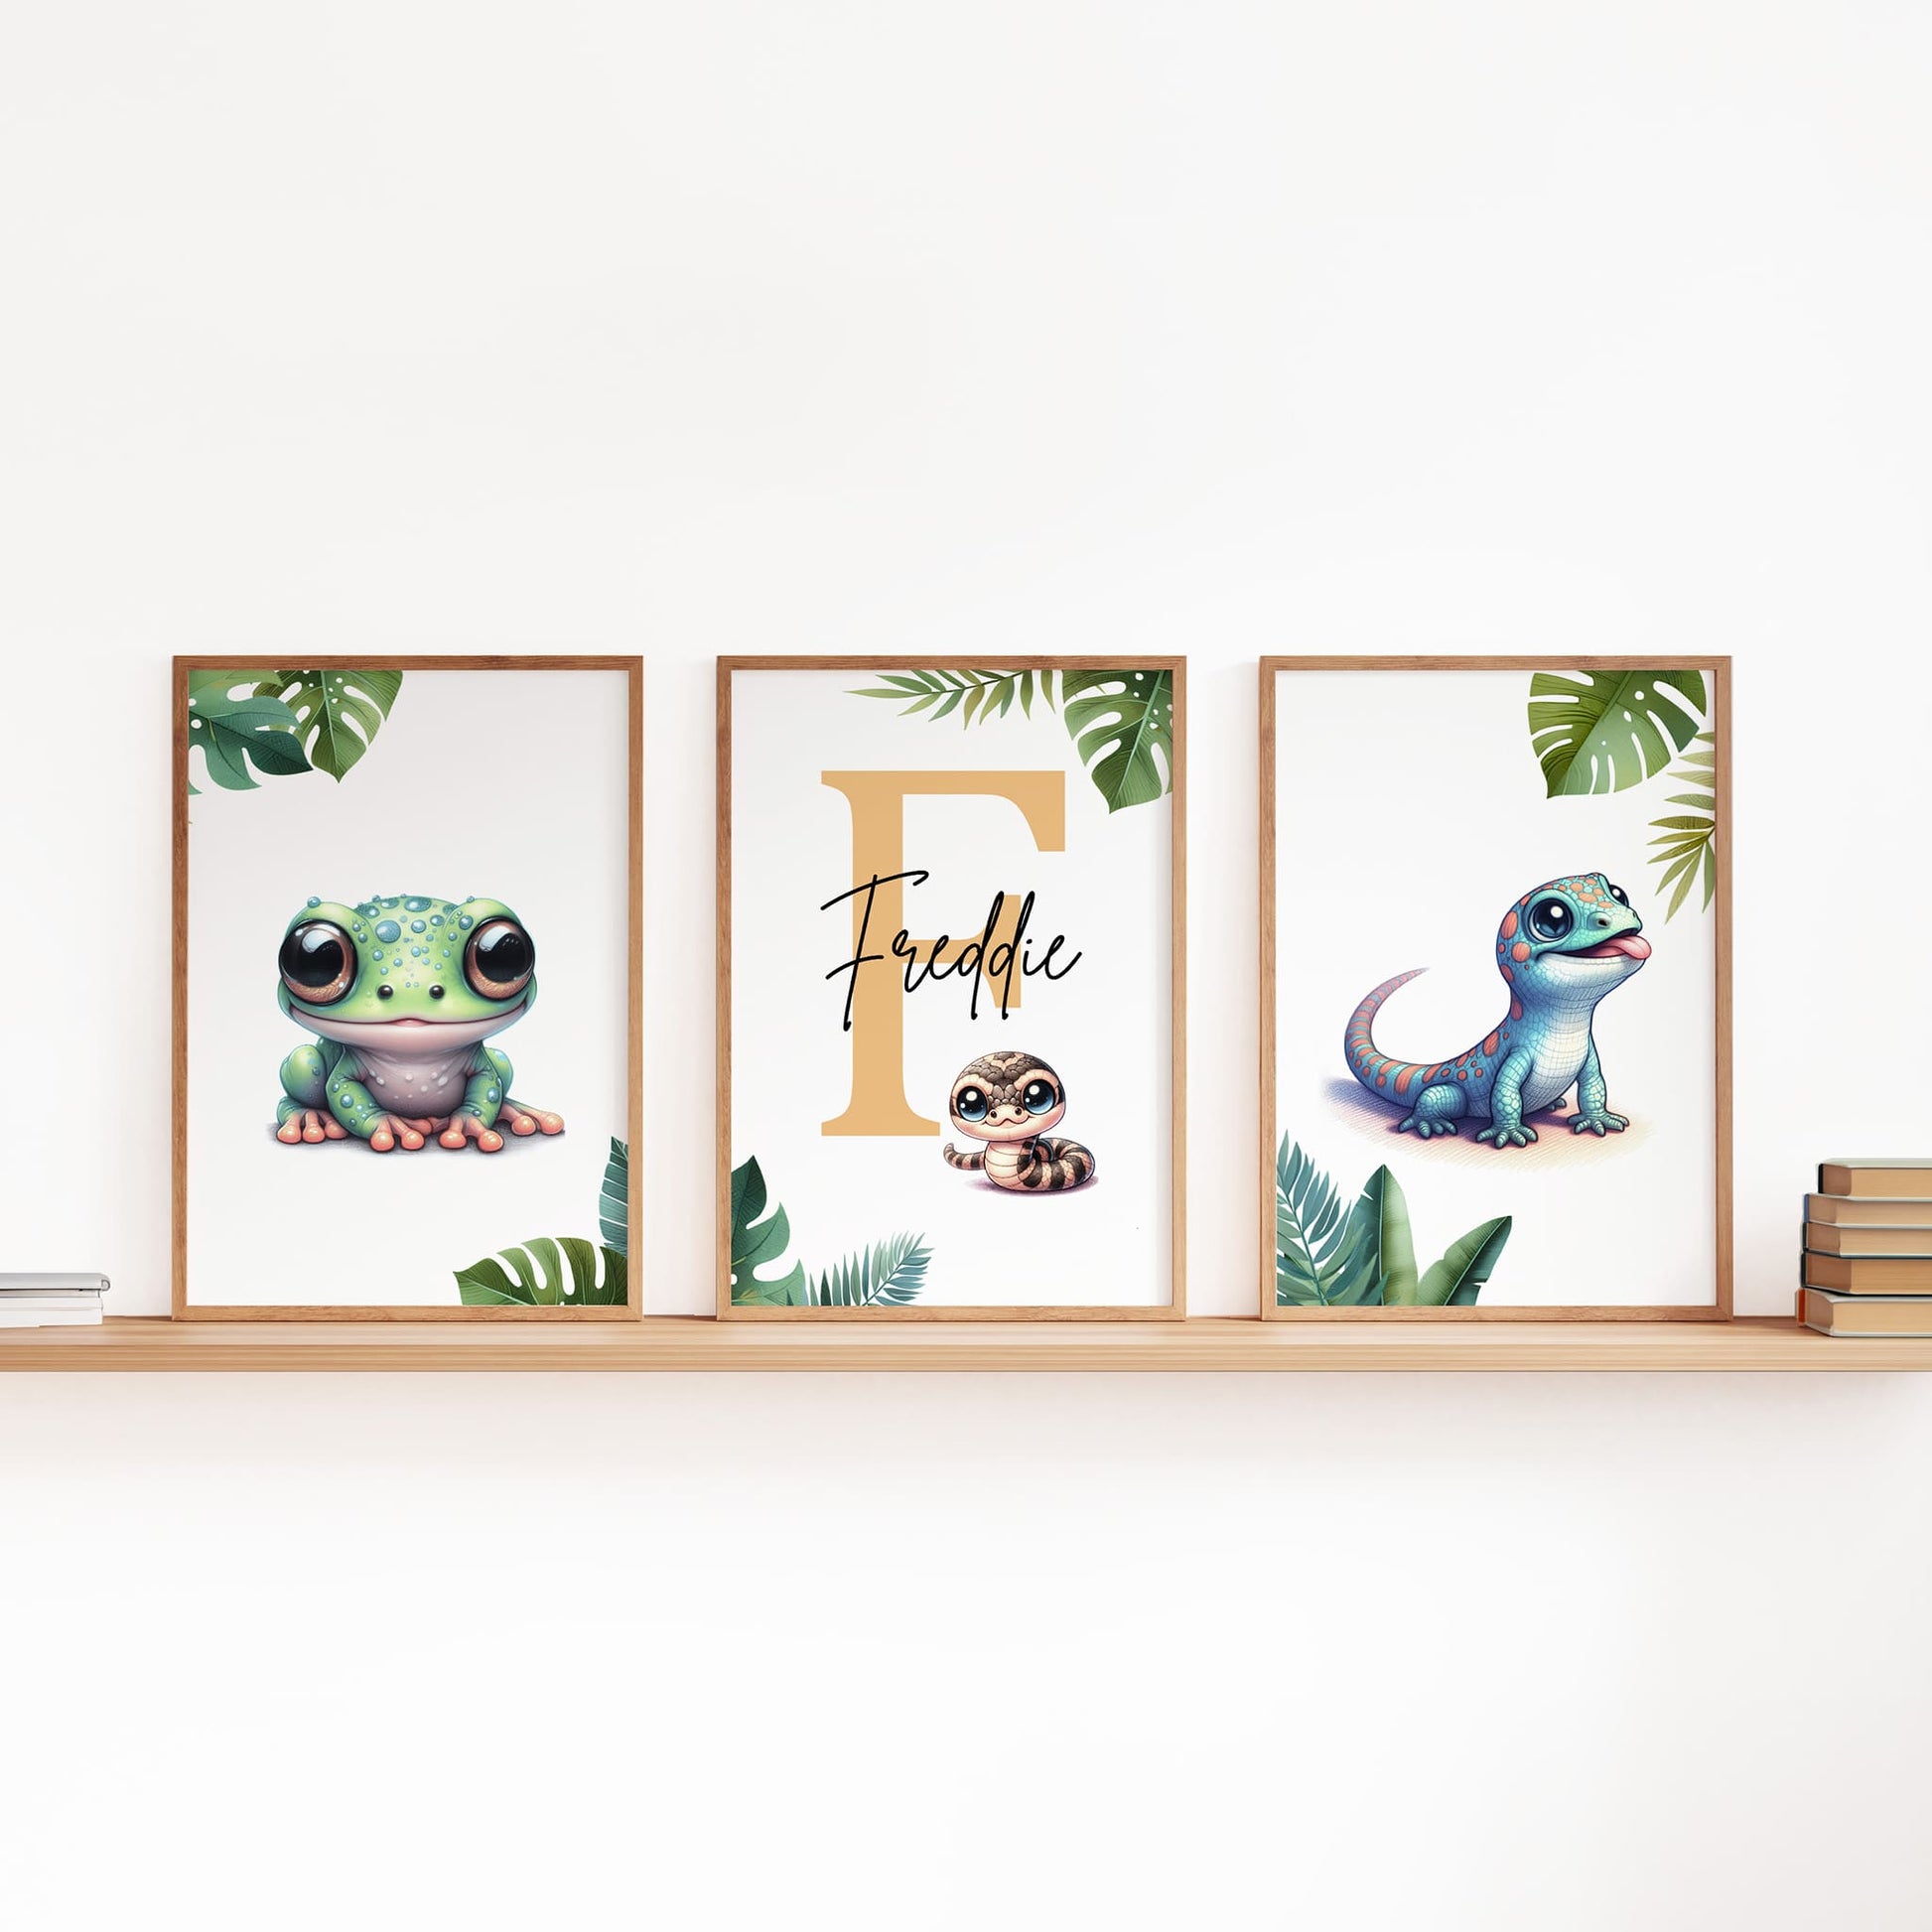 Set of three A4 prints featuring reptiles/amphibians - tree frog, lizard, and snake. The animals are depicted in a cartoony, bright style resembling coloured pencil drawings. Jungle-style leaves decorate the edges of the prints. The middle print features a smaller animal than the others, with a large initial letter in the background. A personalised name in black overlays the initial letter.